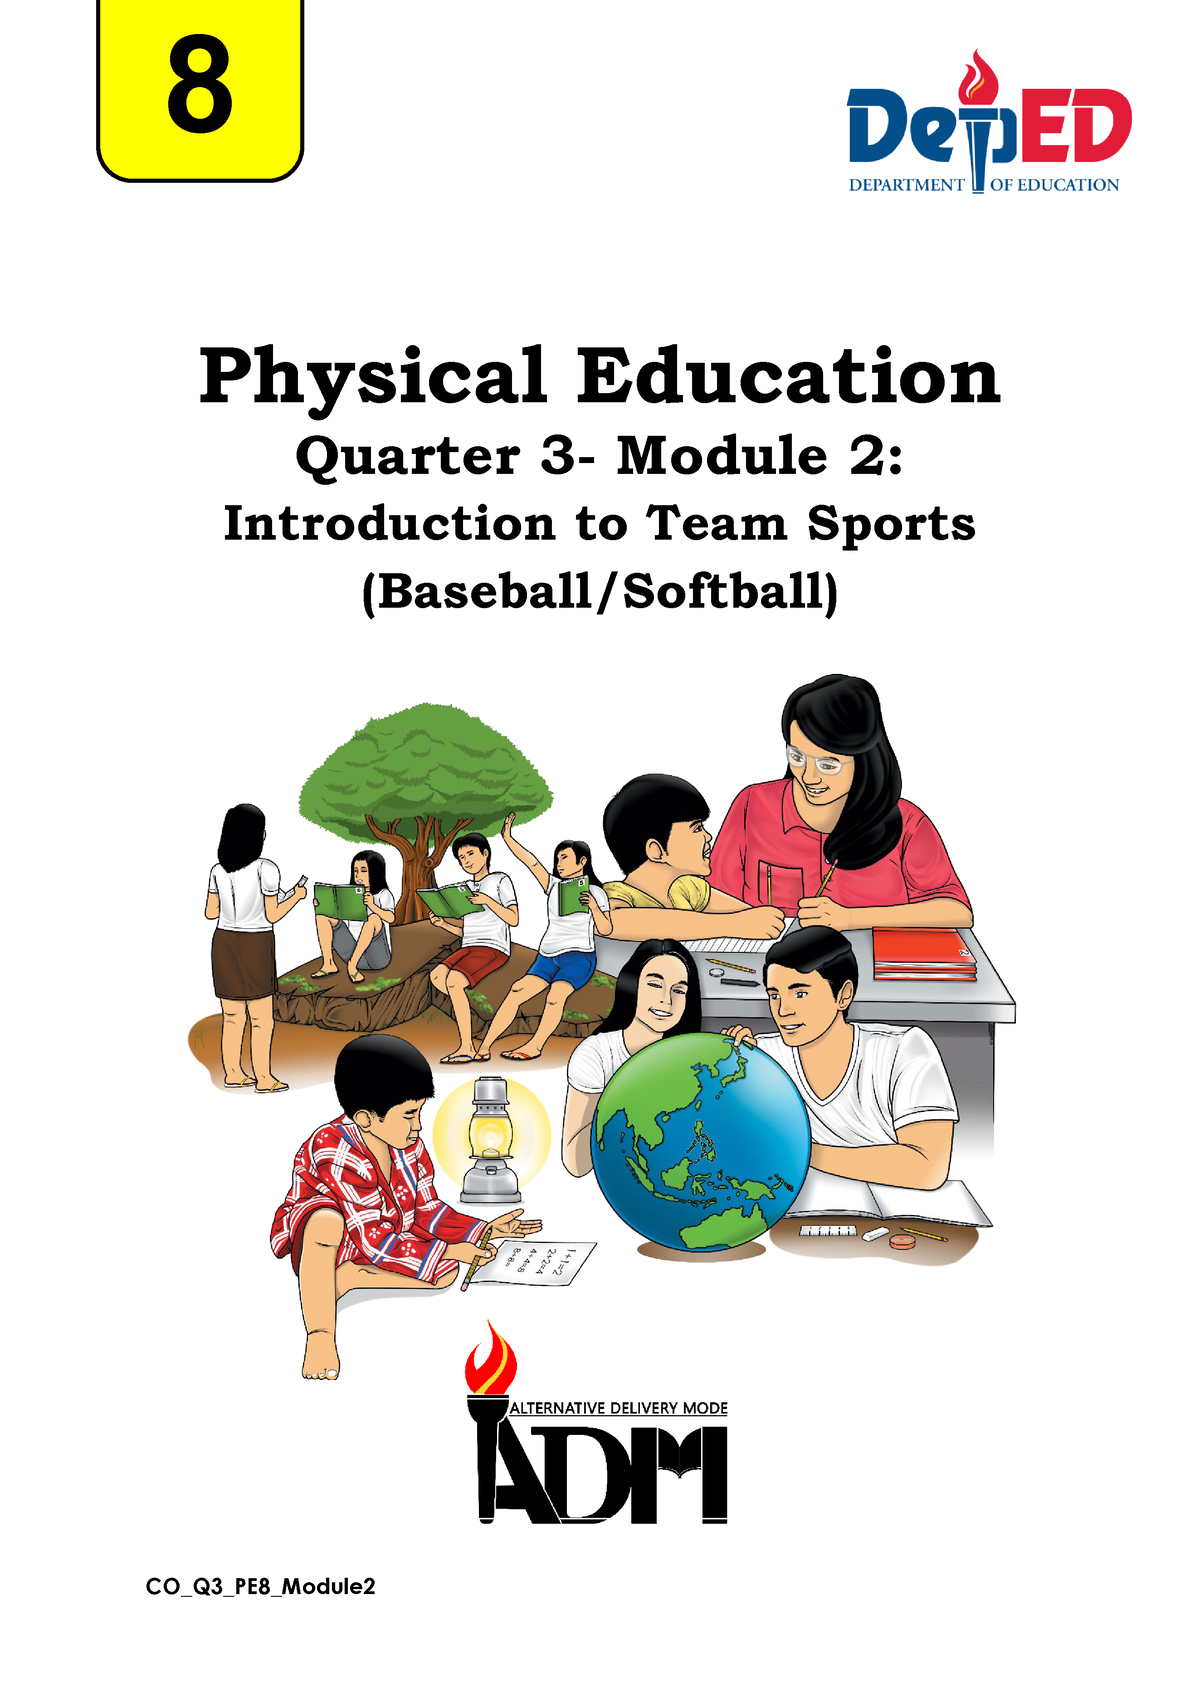 physical education 8 quarter 3 indoor recreational activities